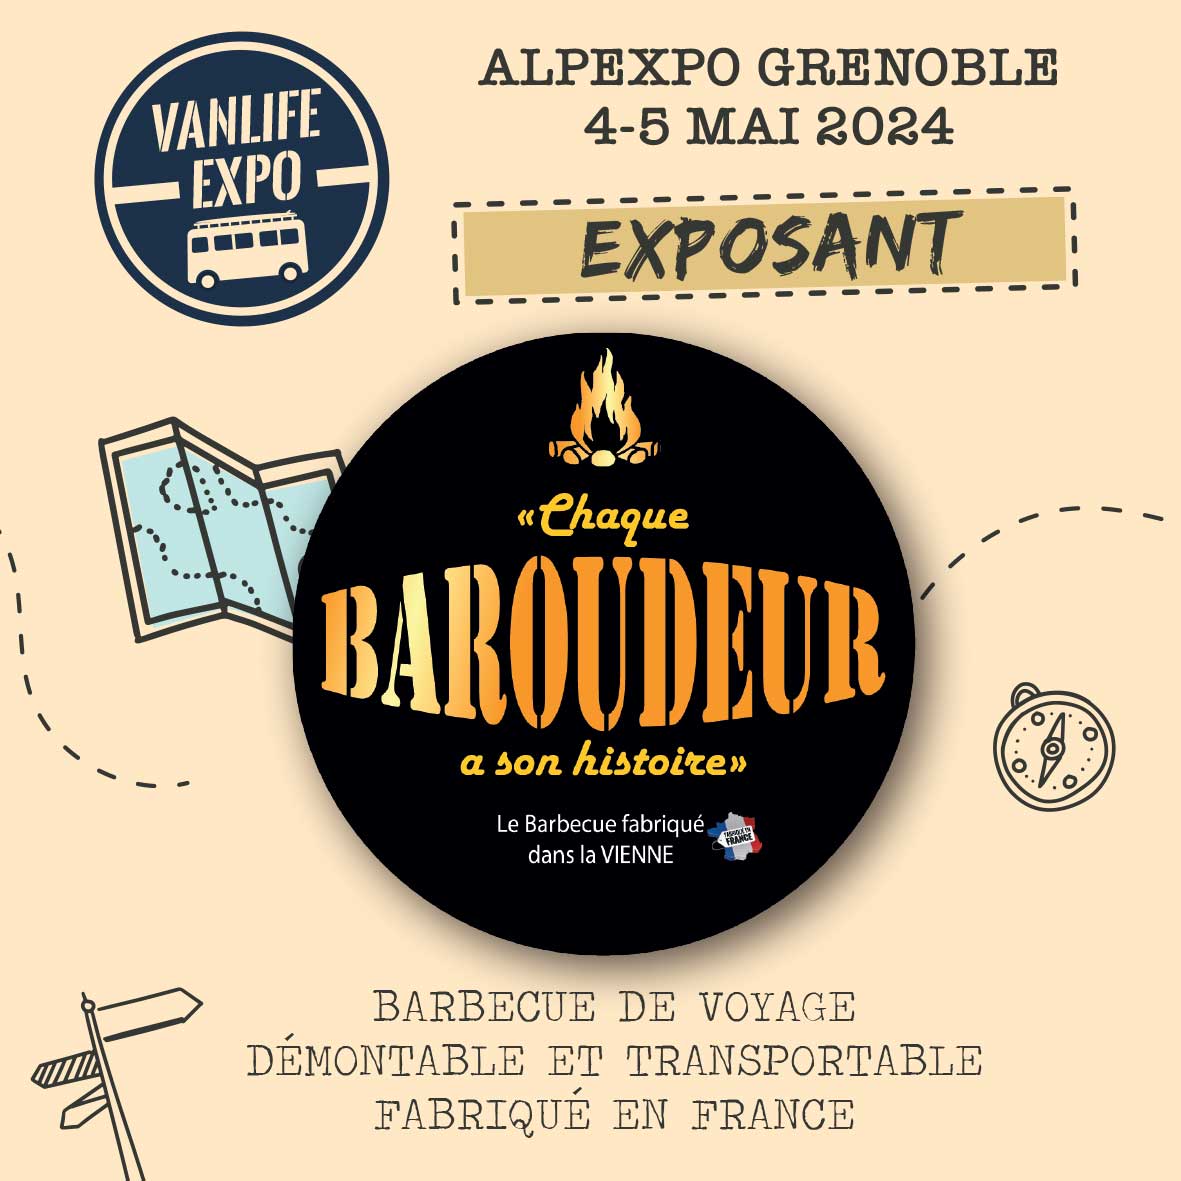 Featured image for “Le baroudeur barbecue”